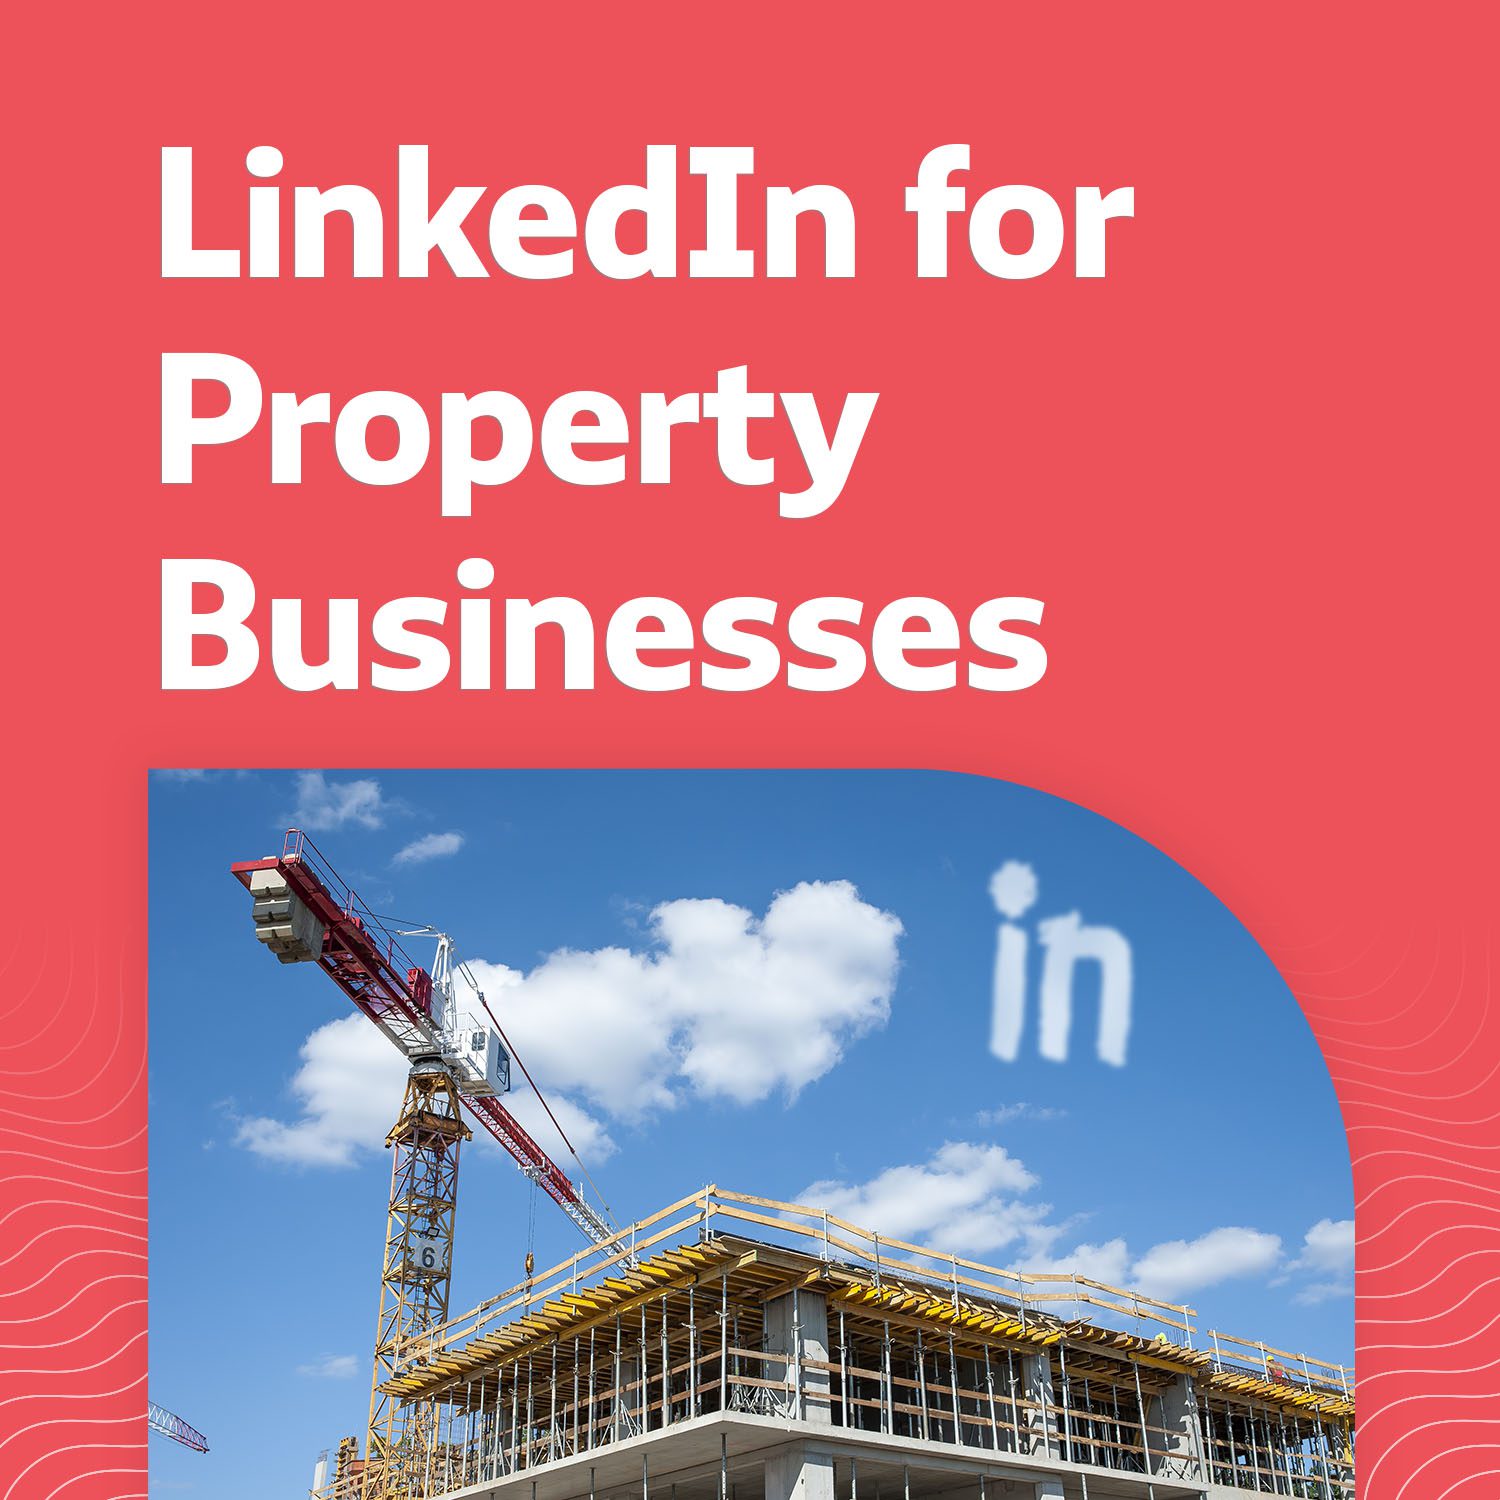 LinkedIn for Property and Construction Businesses